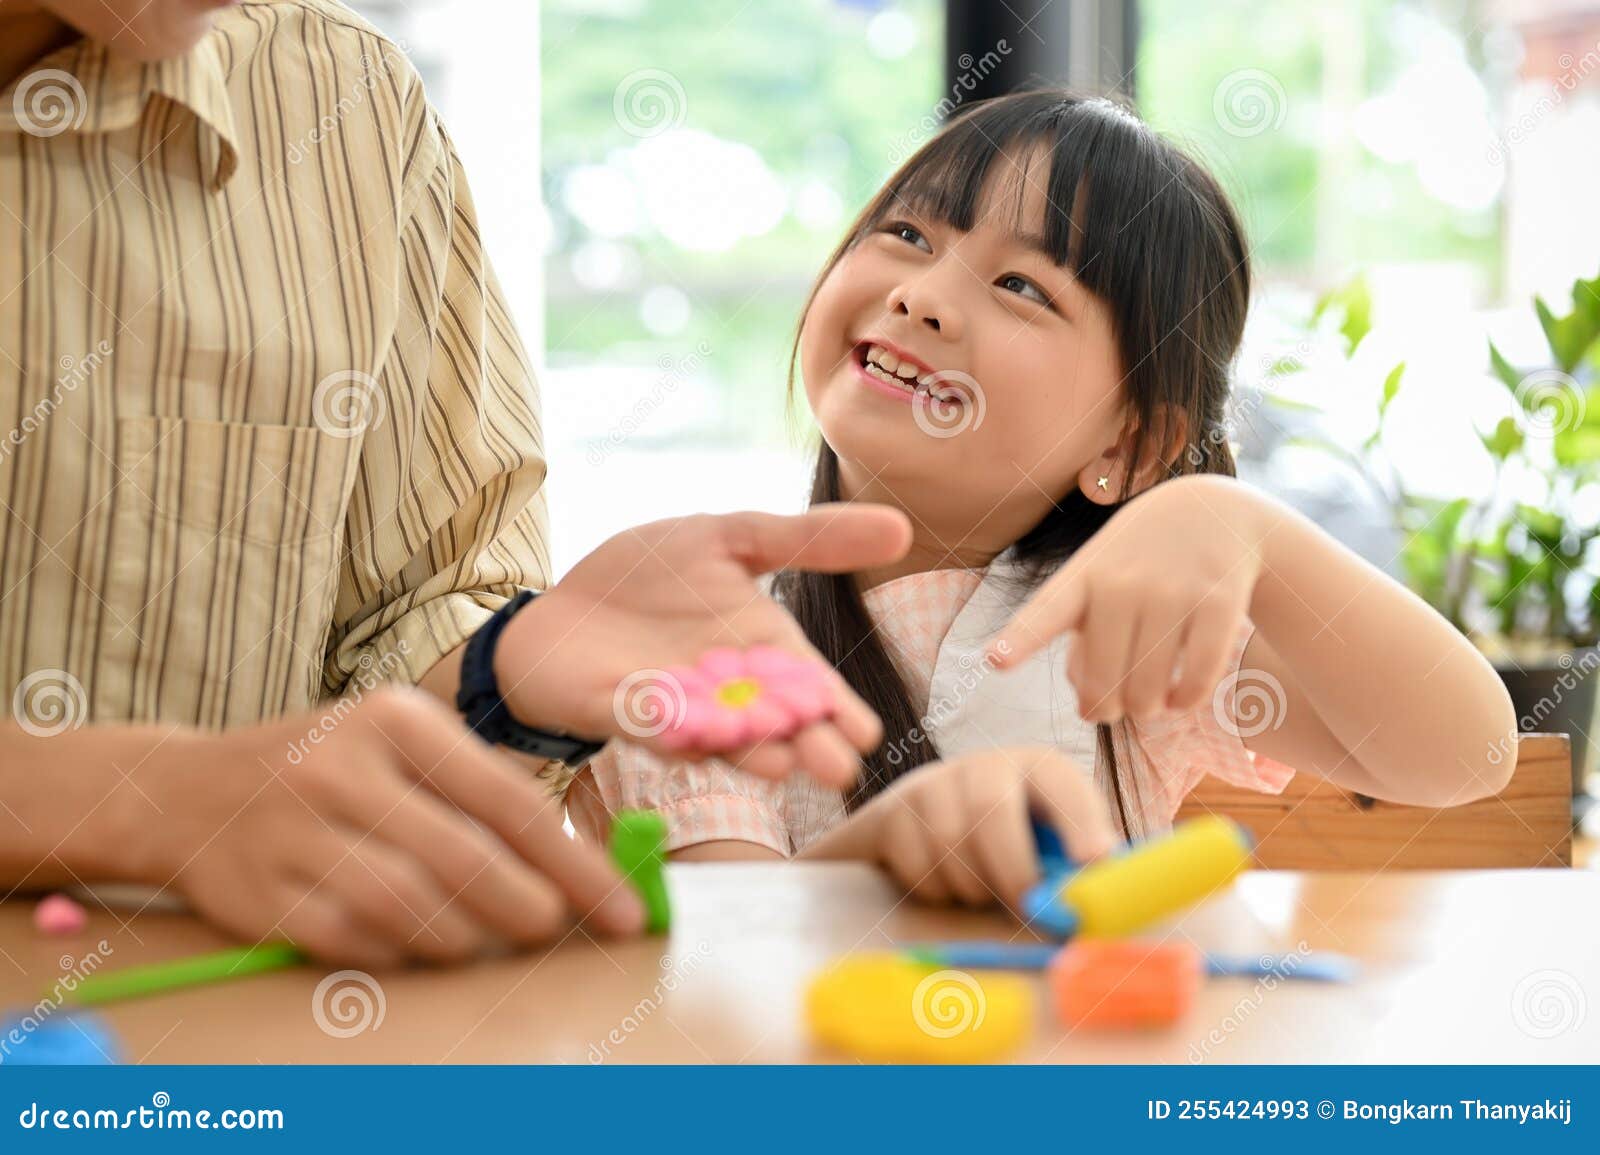 Happy And Smiling Cute Young Asian Girl Enjoy Playing Play Dough With